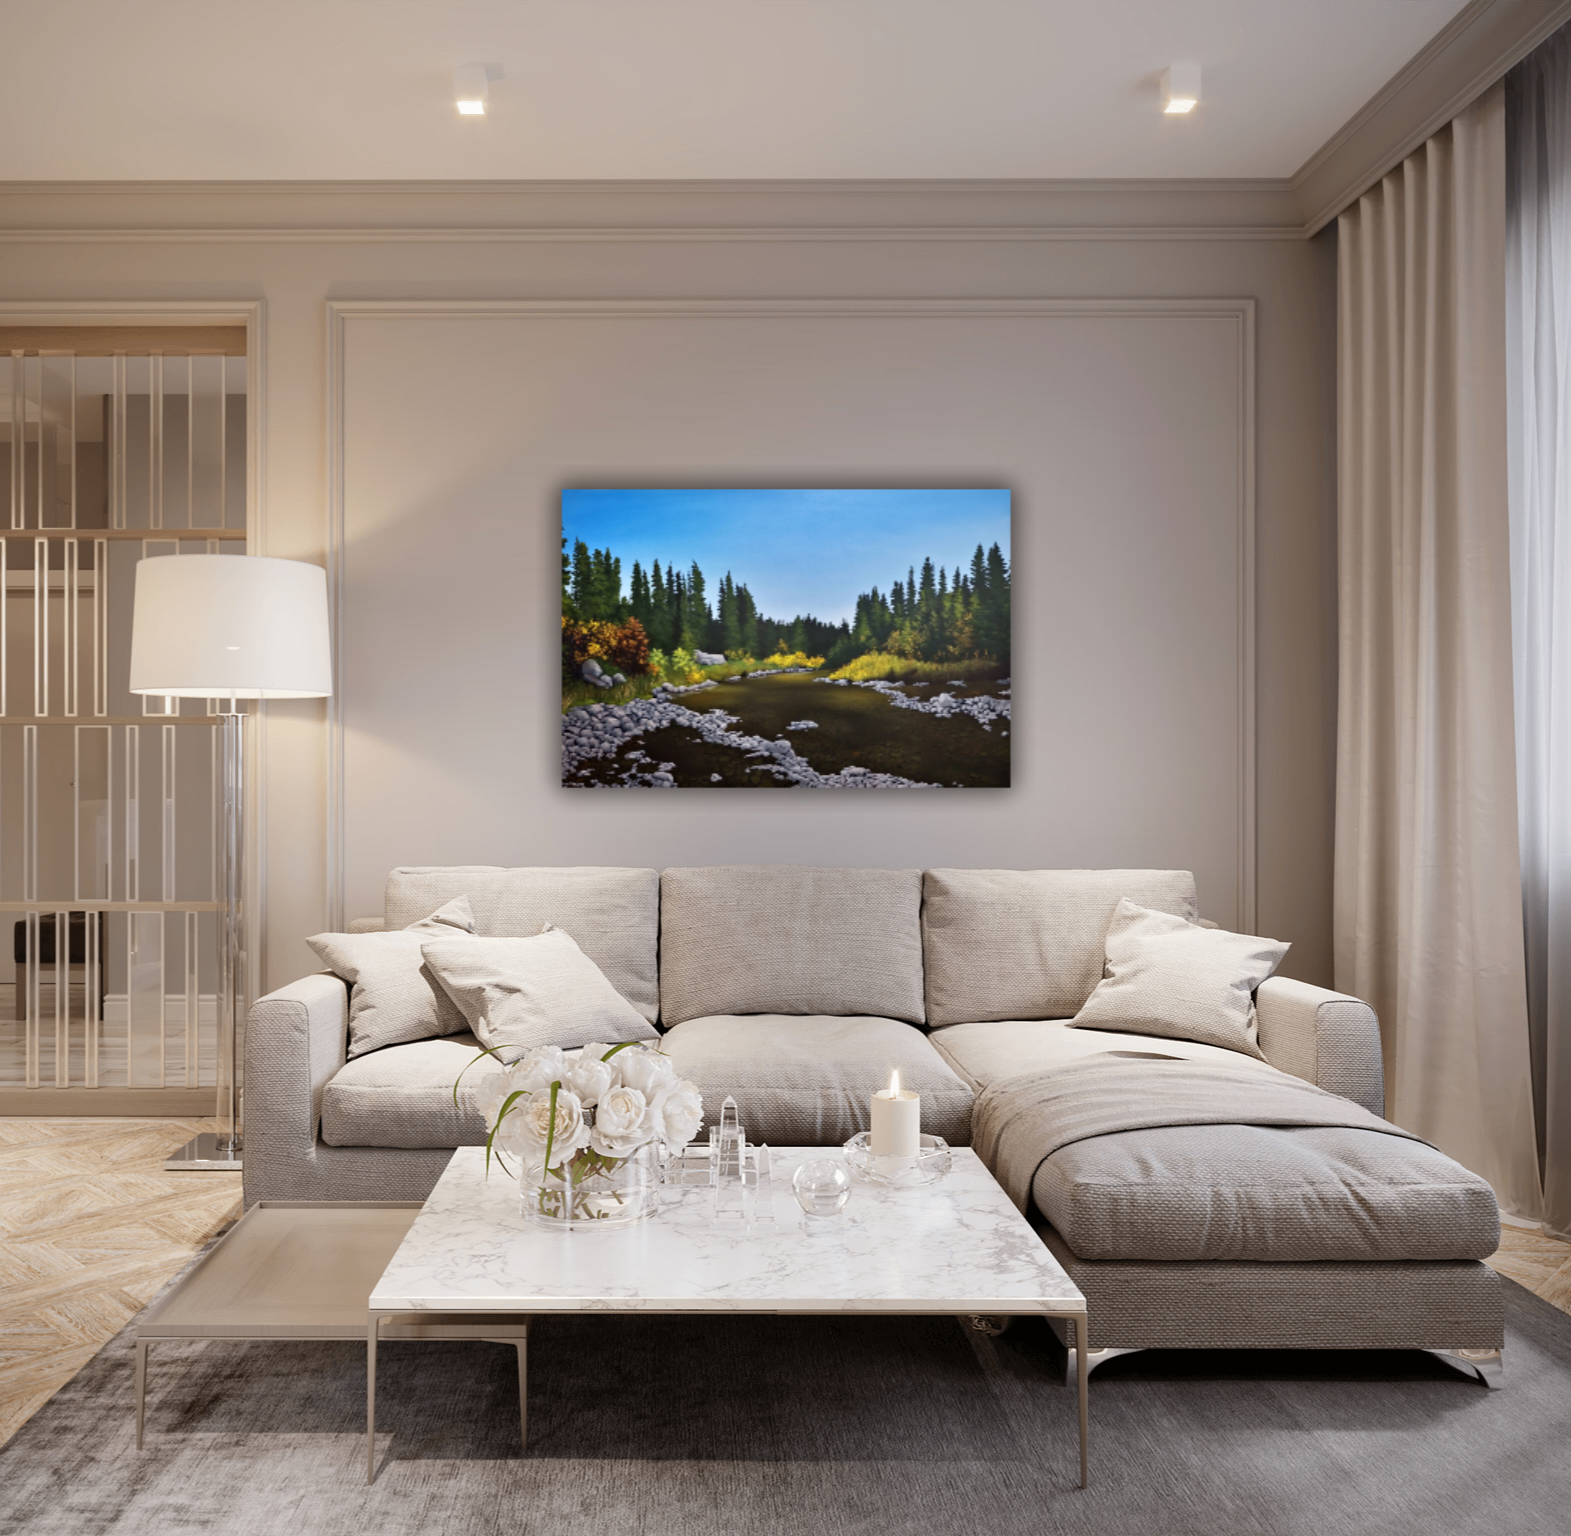 Intermission -  An original landscape painting by Christina Gouldsborough Canadian Landscape Artist, behind a beige sectional in a modern home